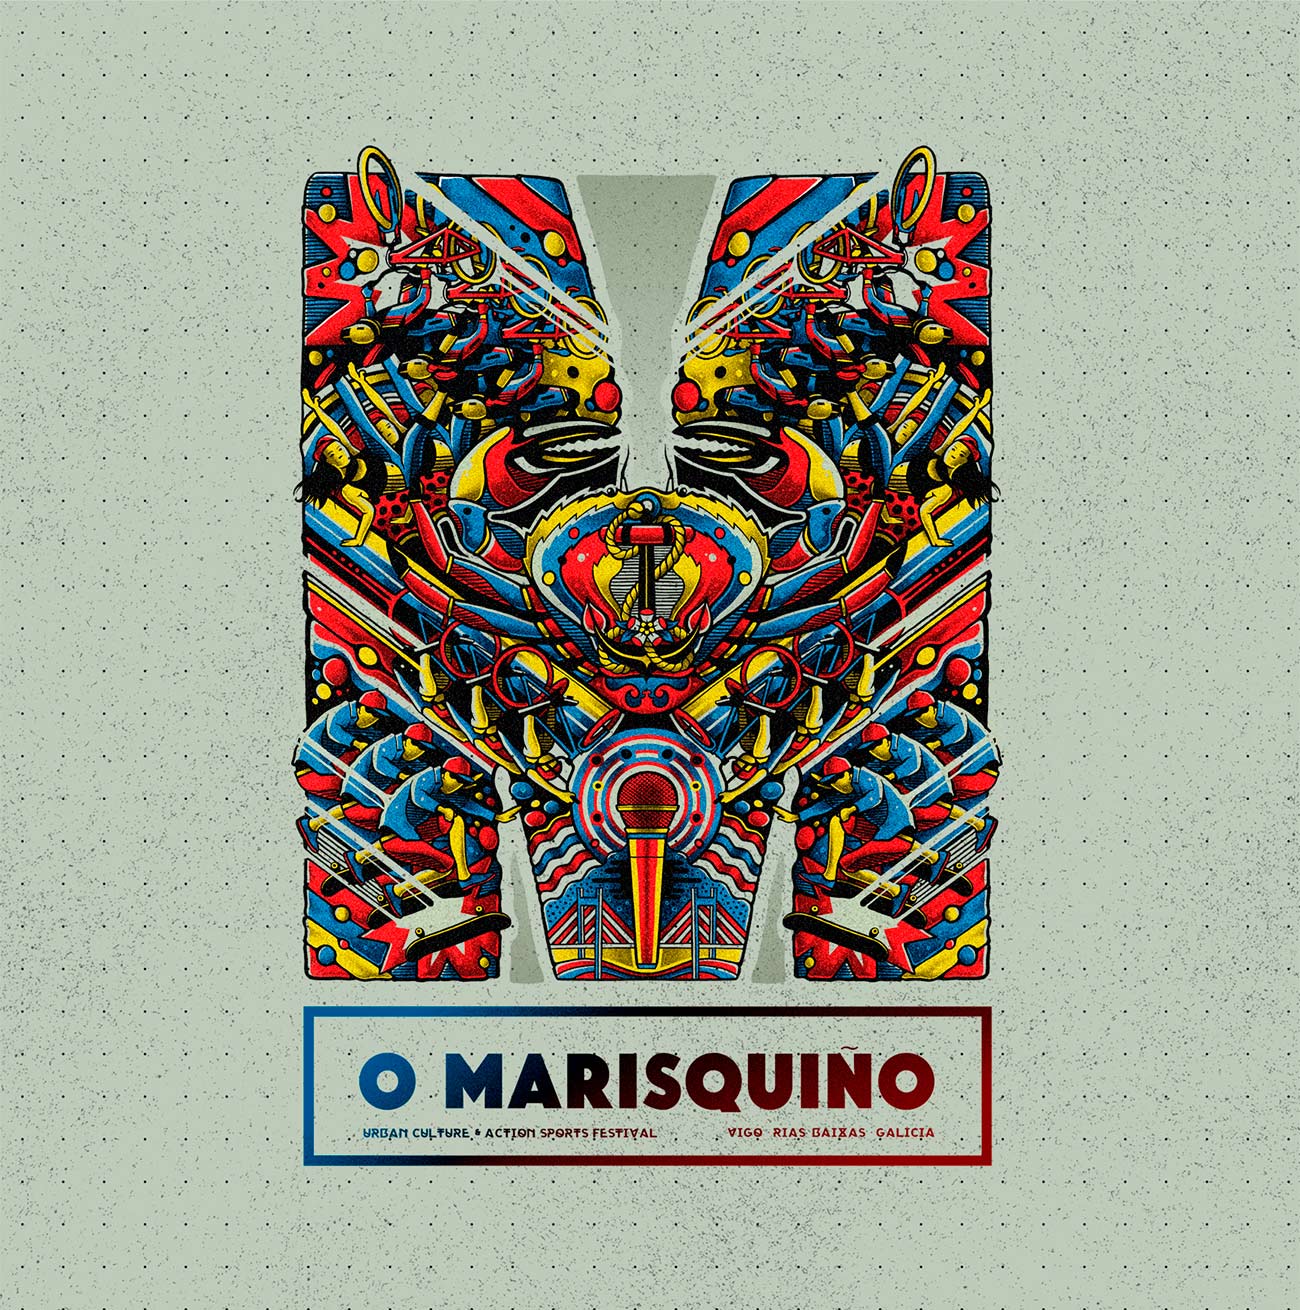 Illustration O Marisquiño skate event by Sr.Reny